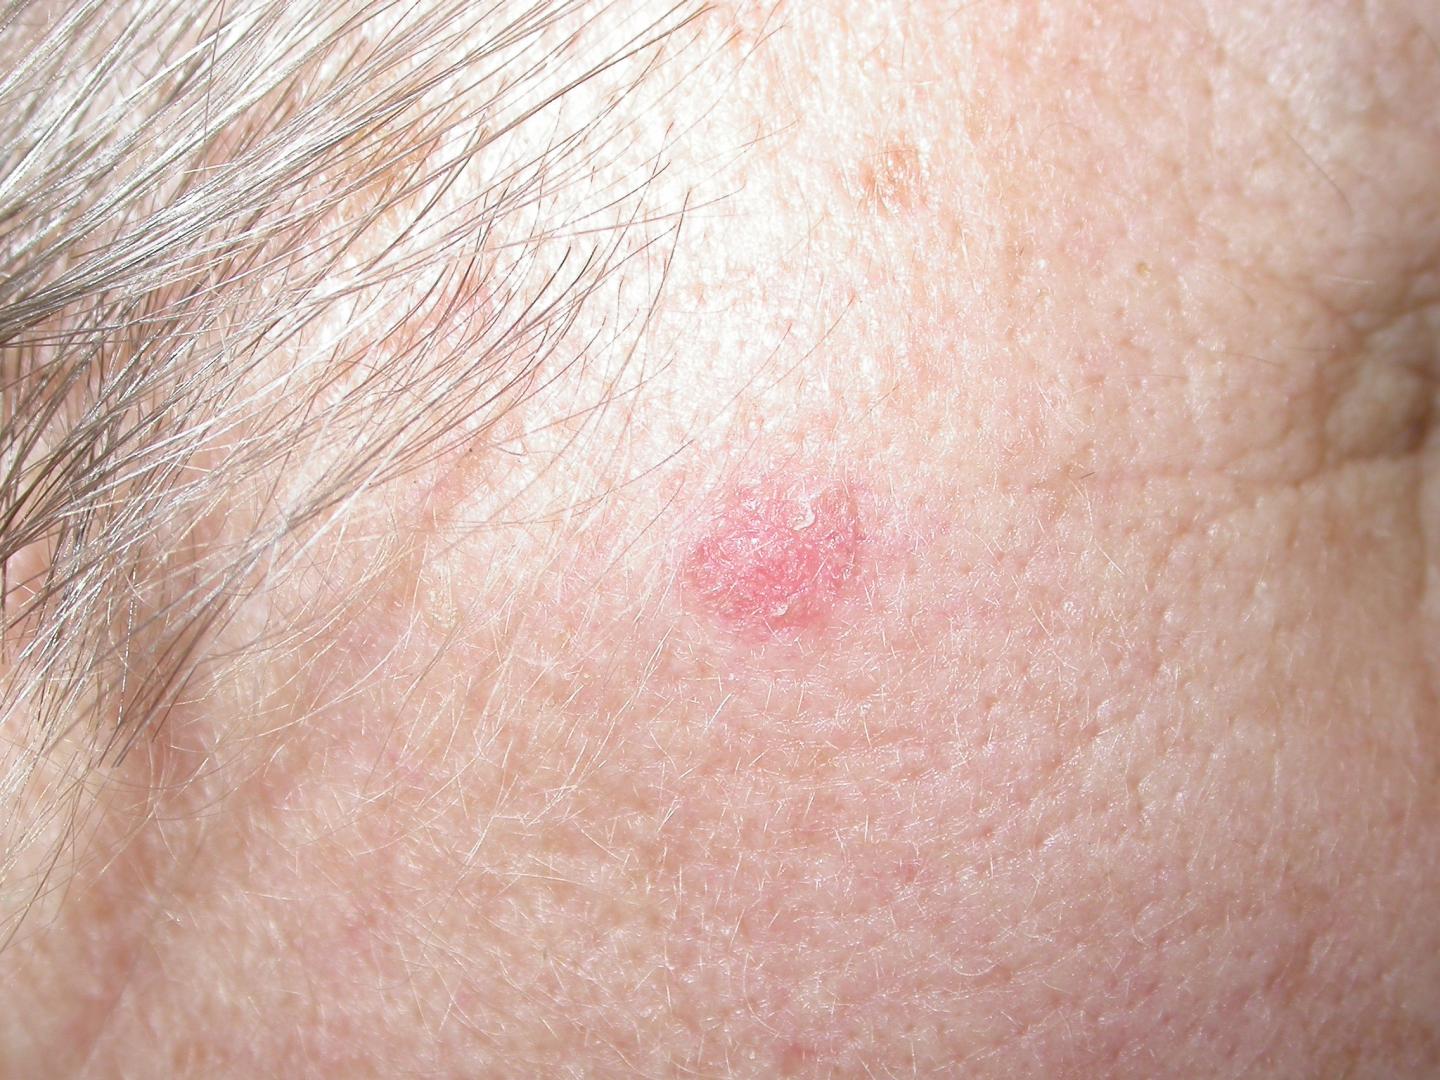 Topical Skin Cream for Treatment of Basal Cell Carcinoma Shows Promise as an Alternative to Surgery